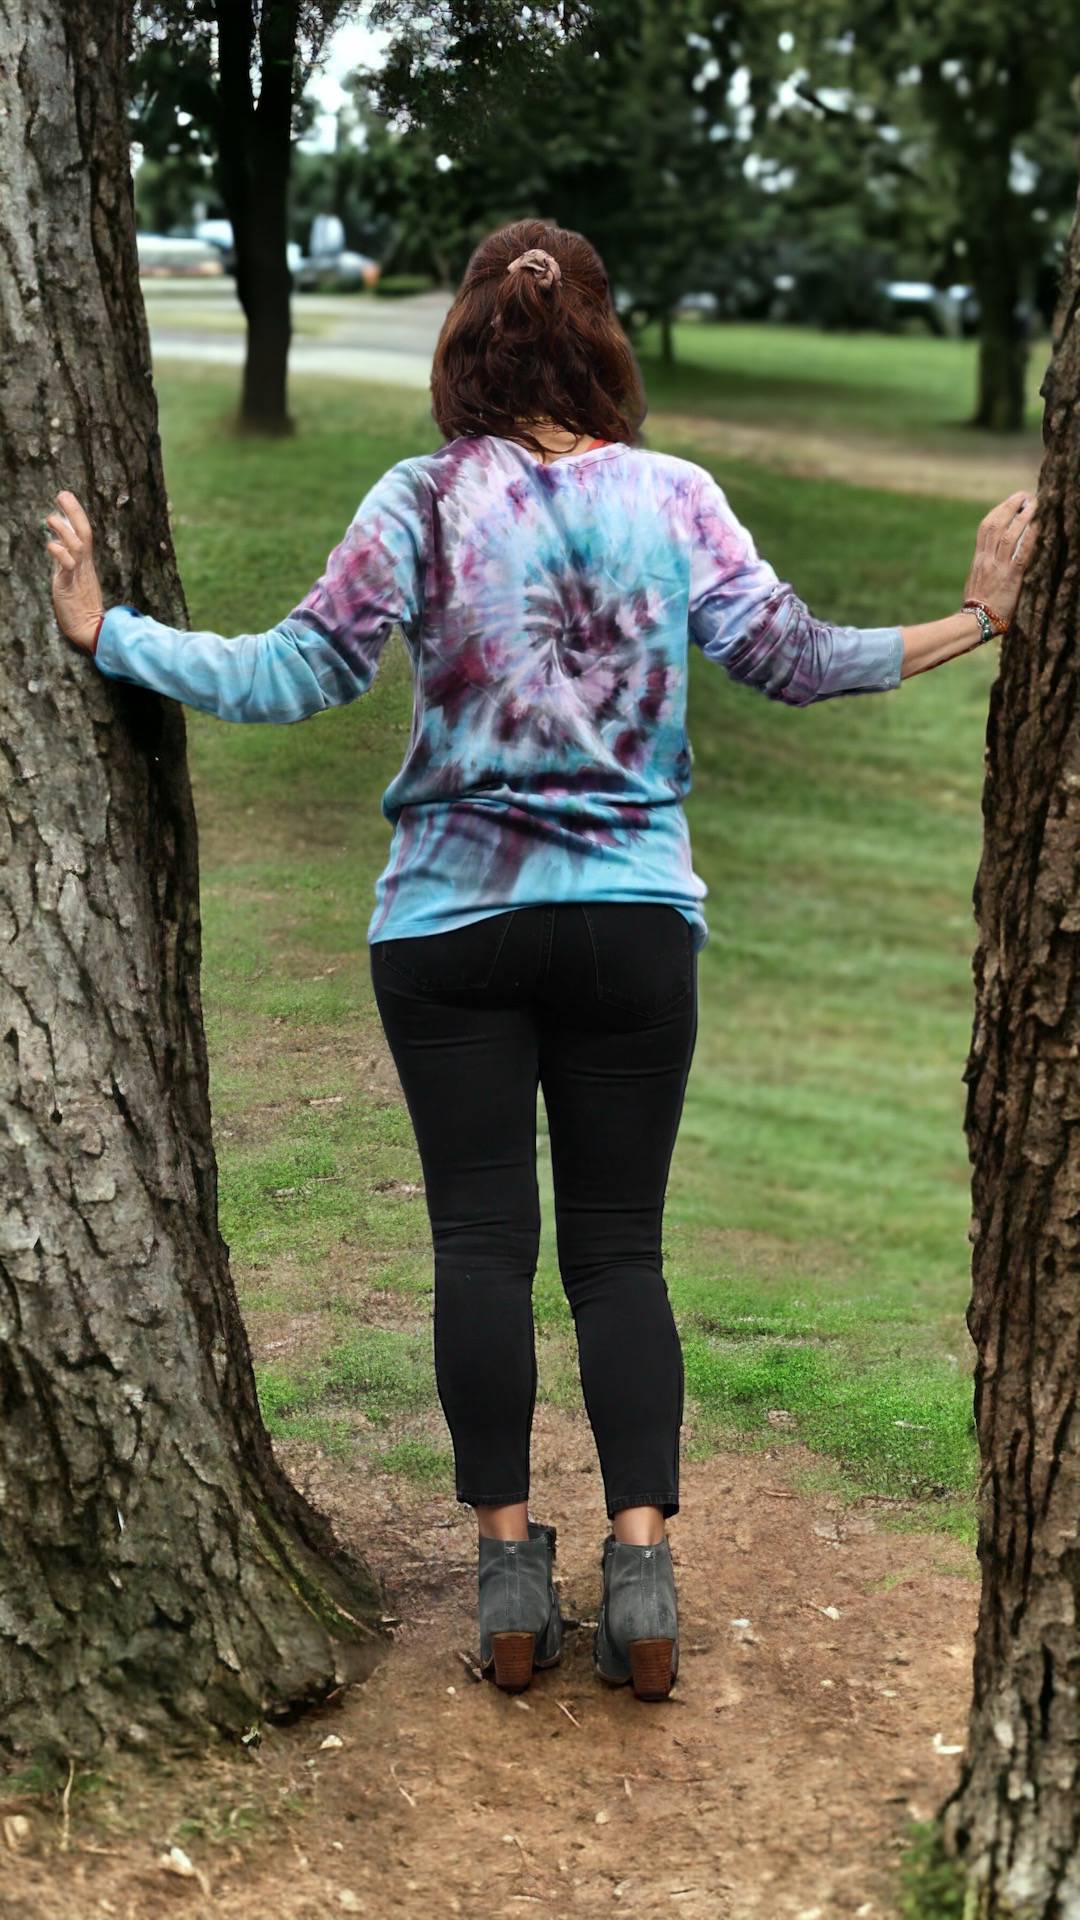 
                  
                    Gap Hand Tie Dyed Women's Blue Long Sleeves Top Size L | Gift For Her | T-Shirt To Dress It Up And Down | Unique Gift For Stylish Ladies | Model Between Trees
                  
                